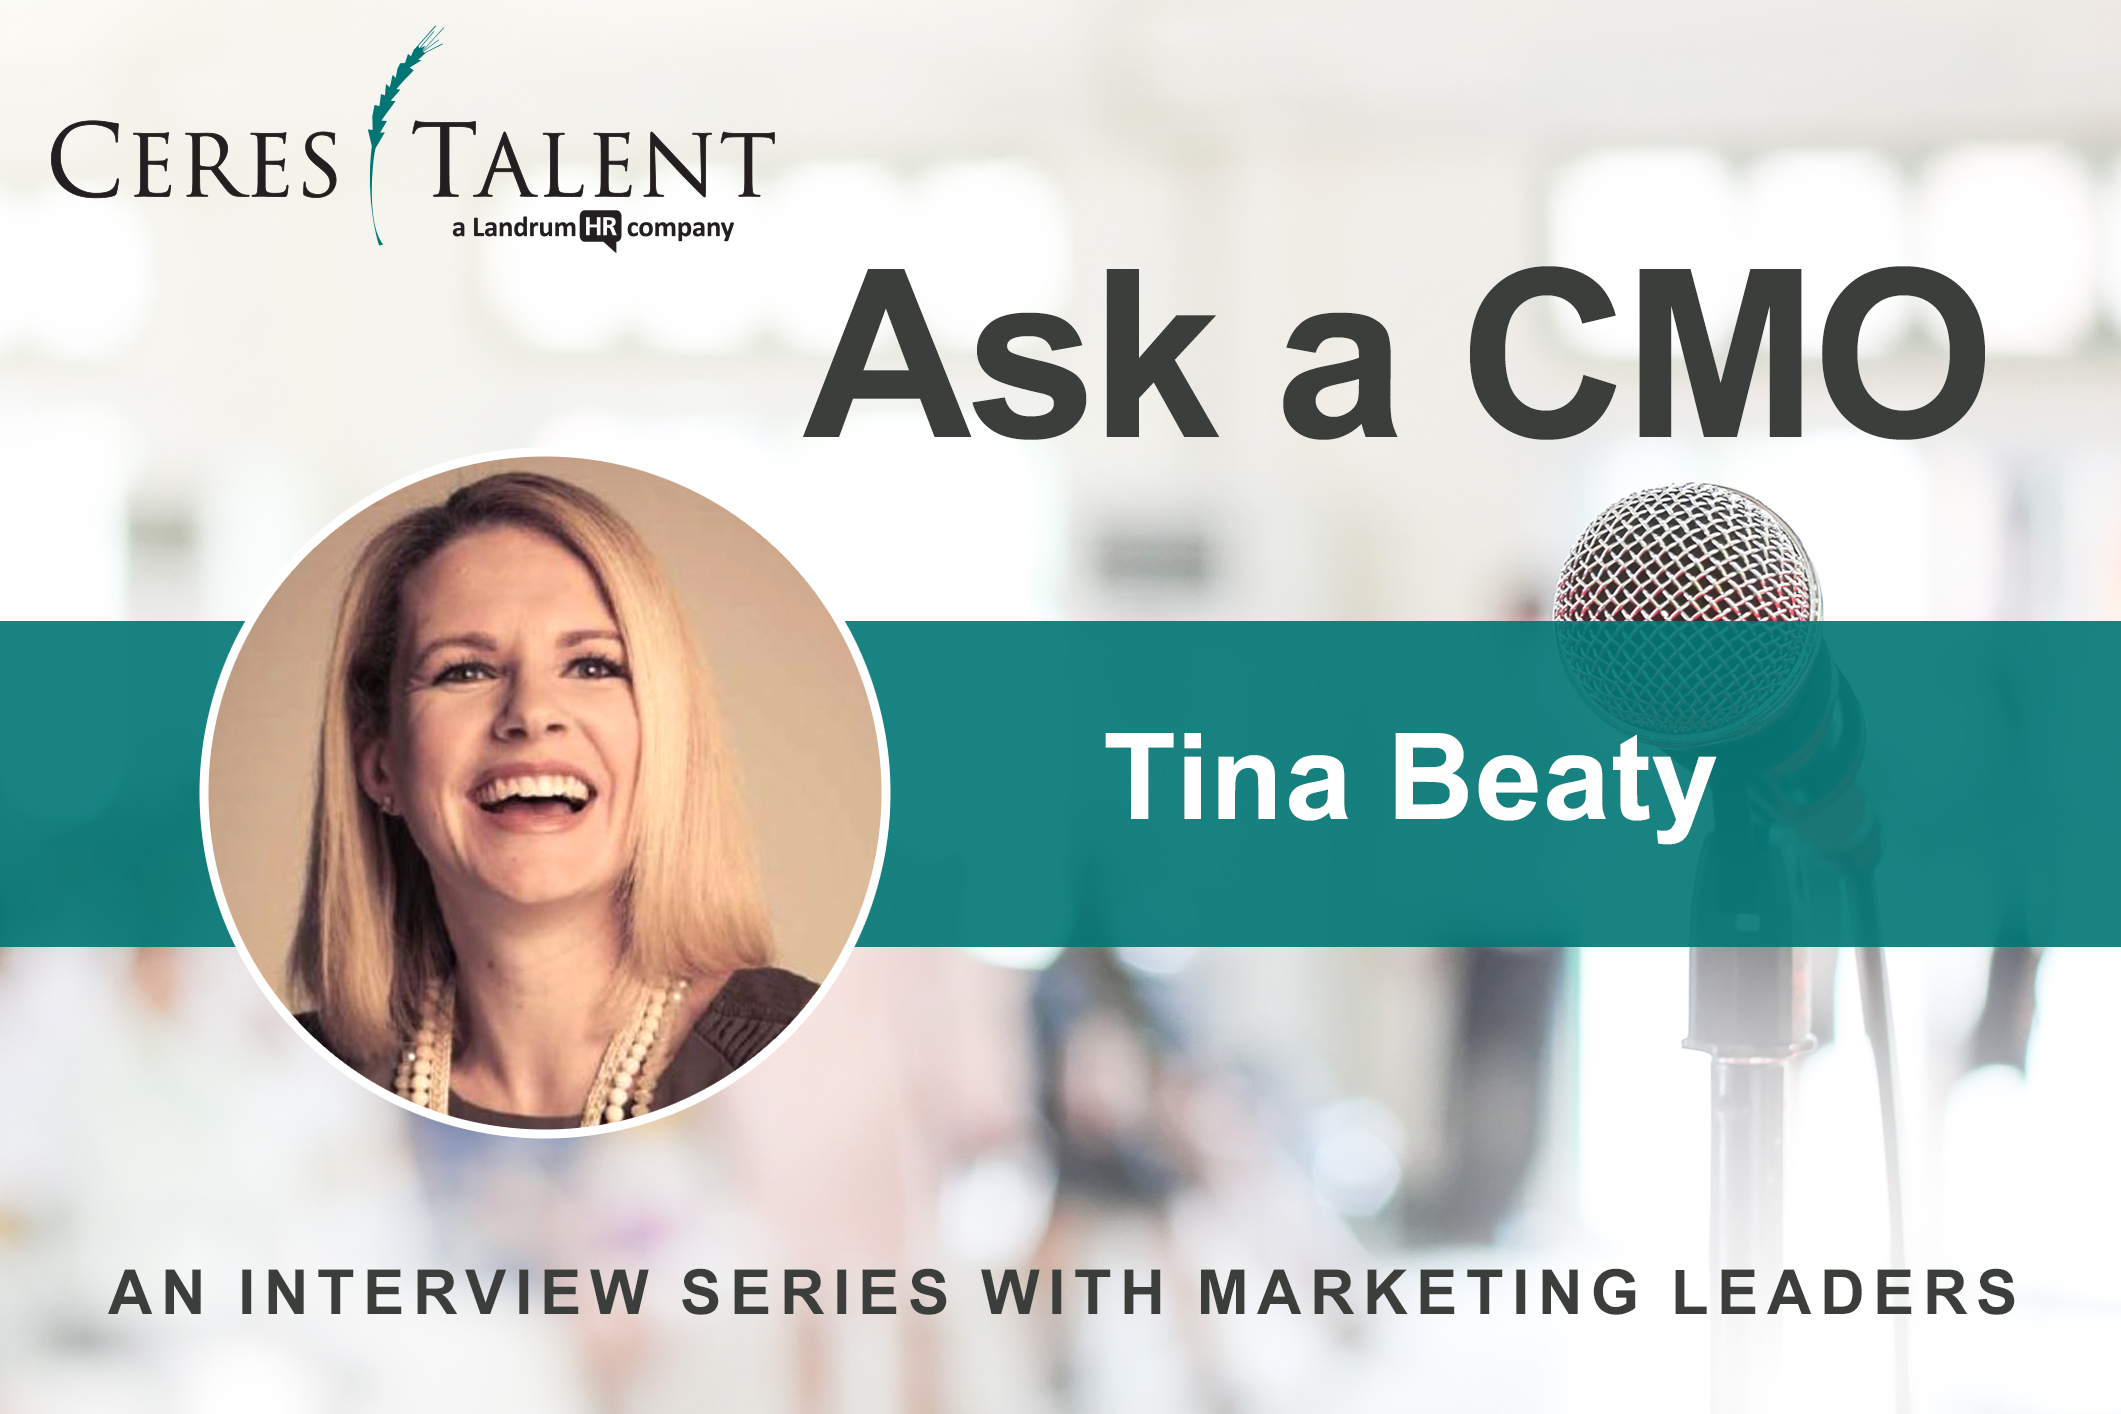 Ask a CMO with Tina Beaty from Ceres Talent